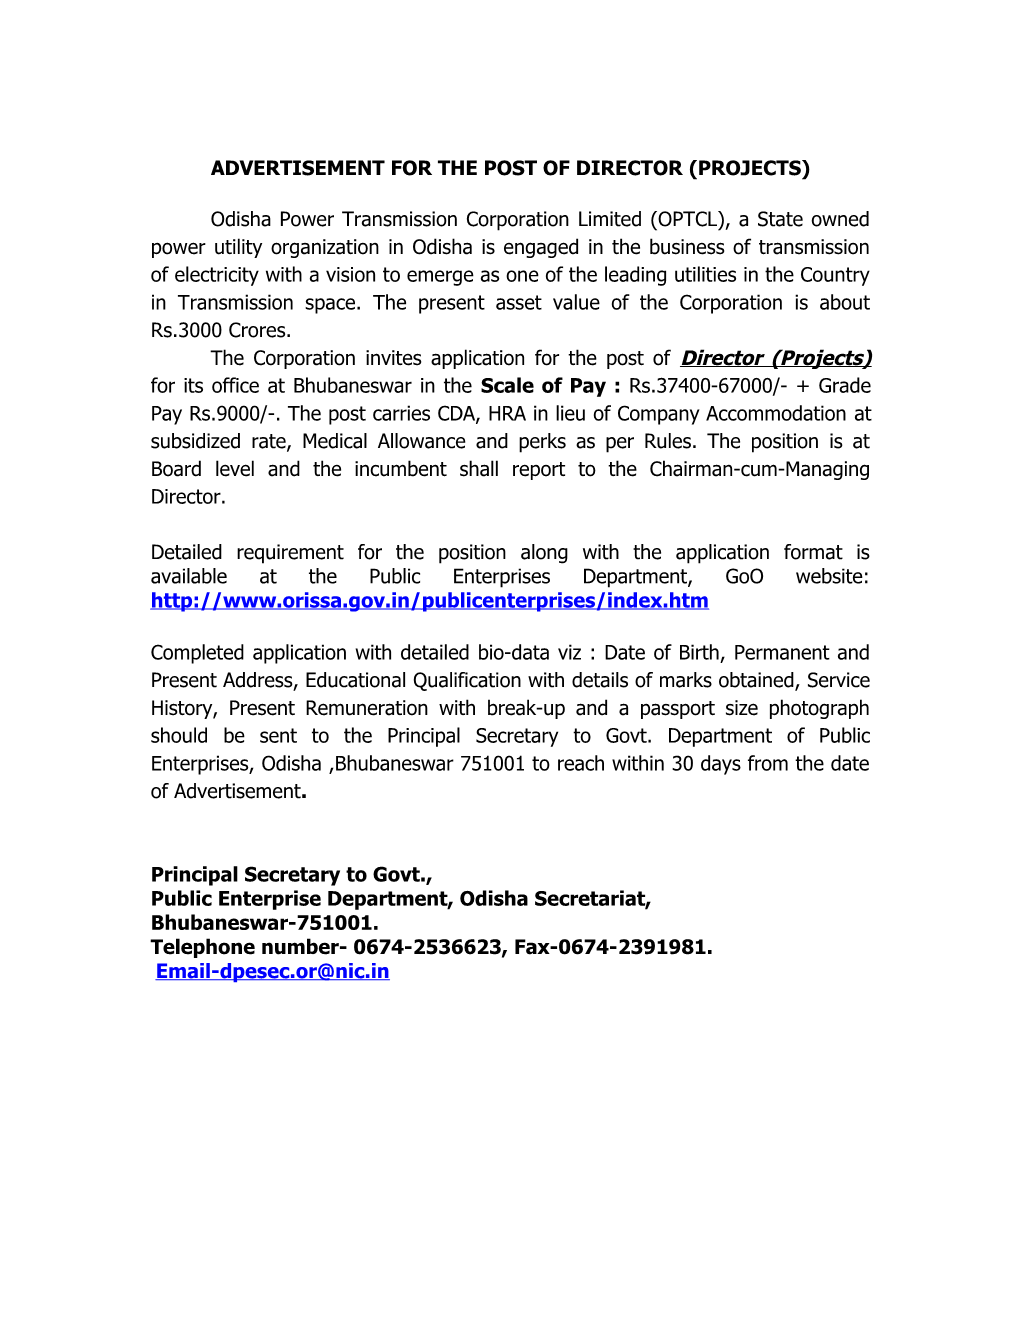 Advertisement for the Post of Director (Projects)